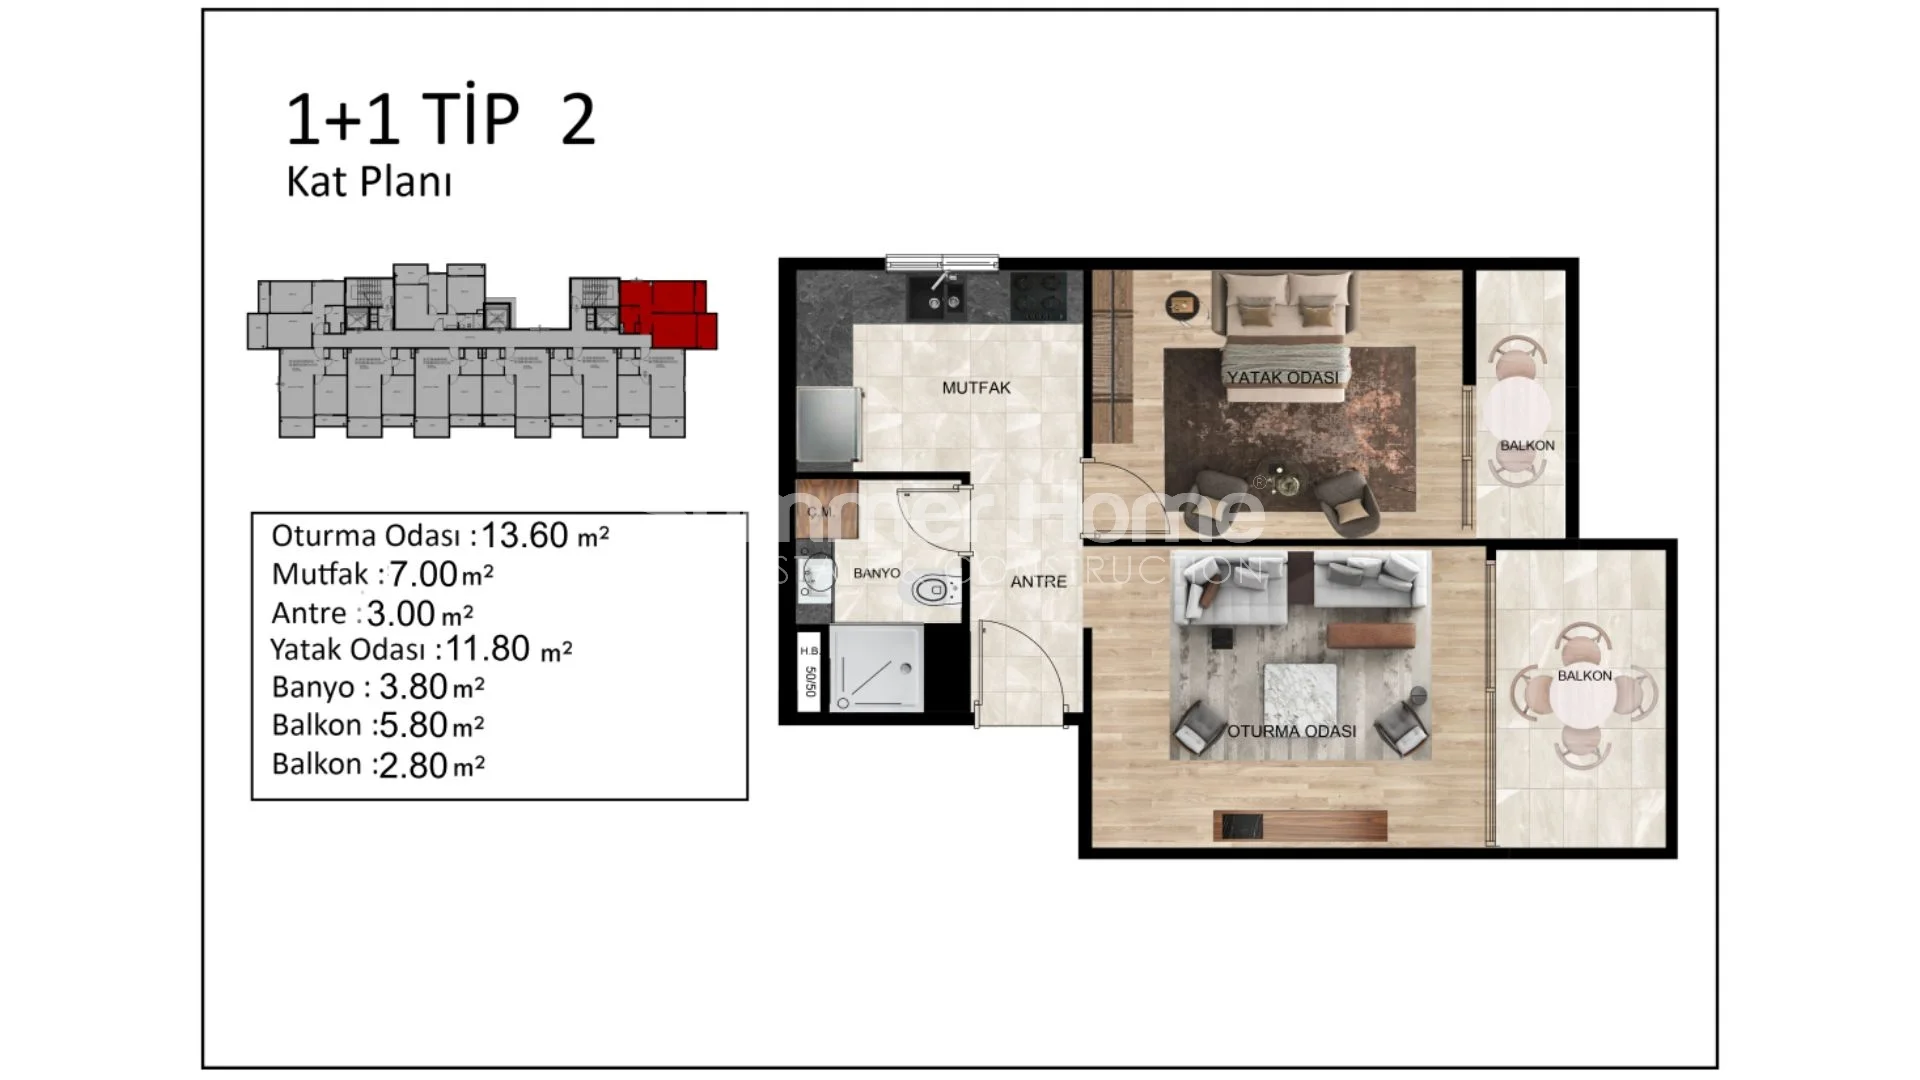 Contemporary establishment, located in Tomuk, west of Mersin Plan - 25